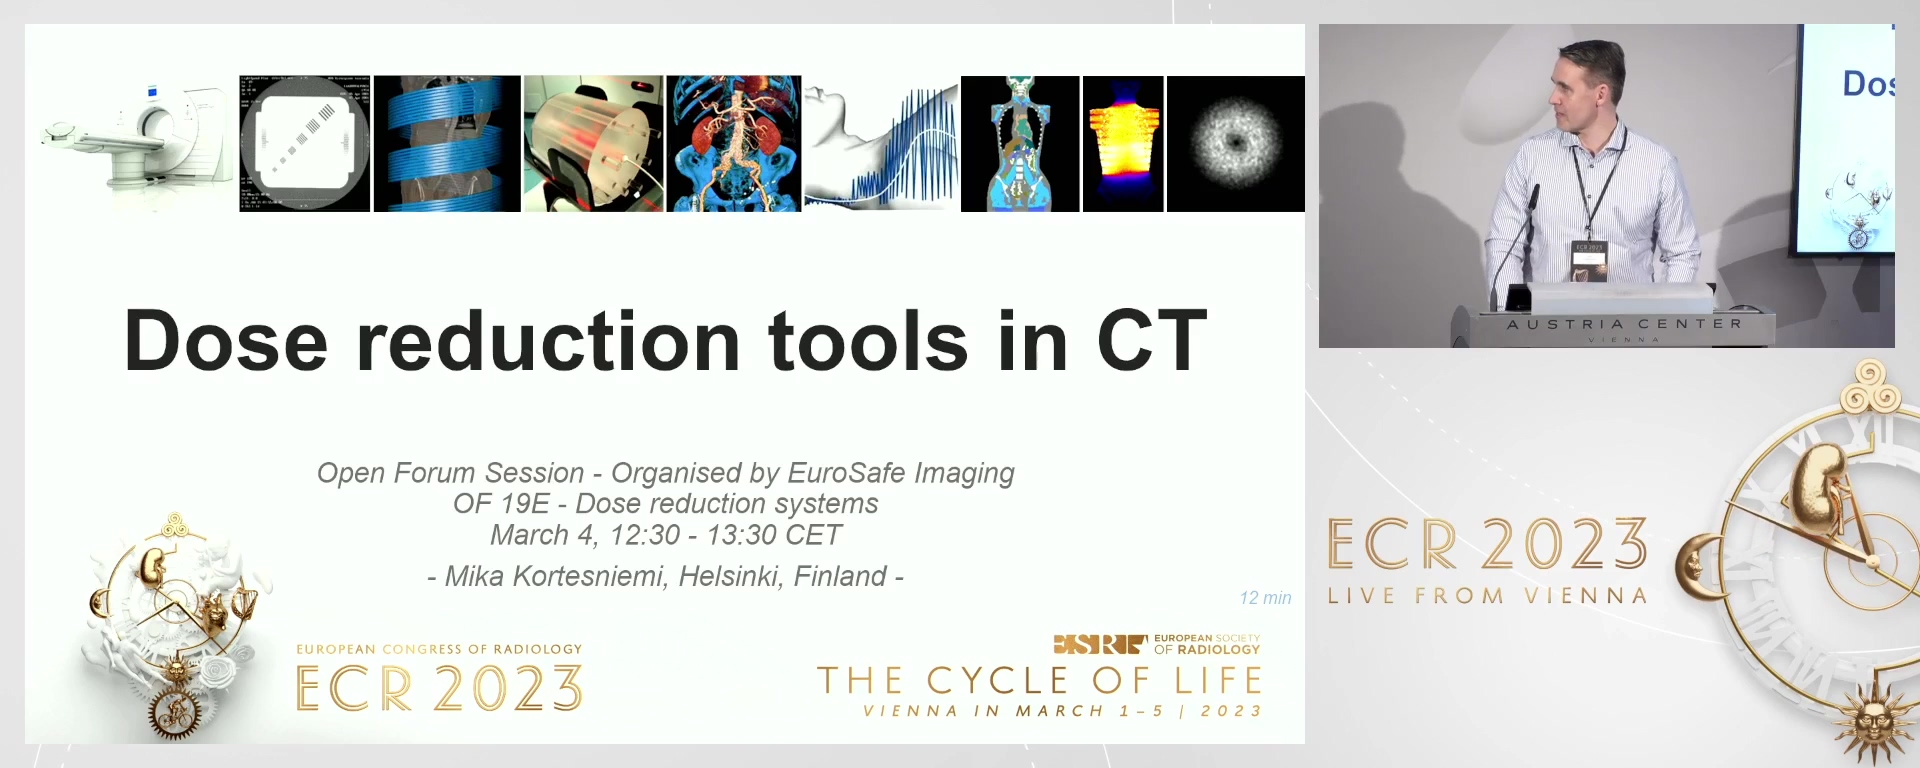 Dose reduction tools in CT